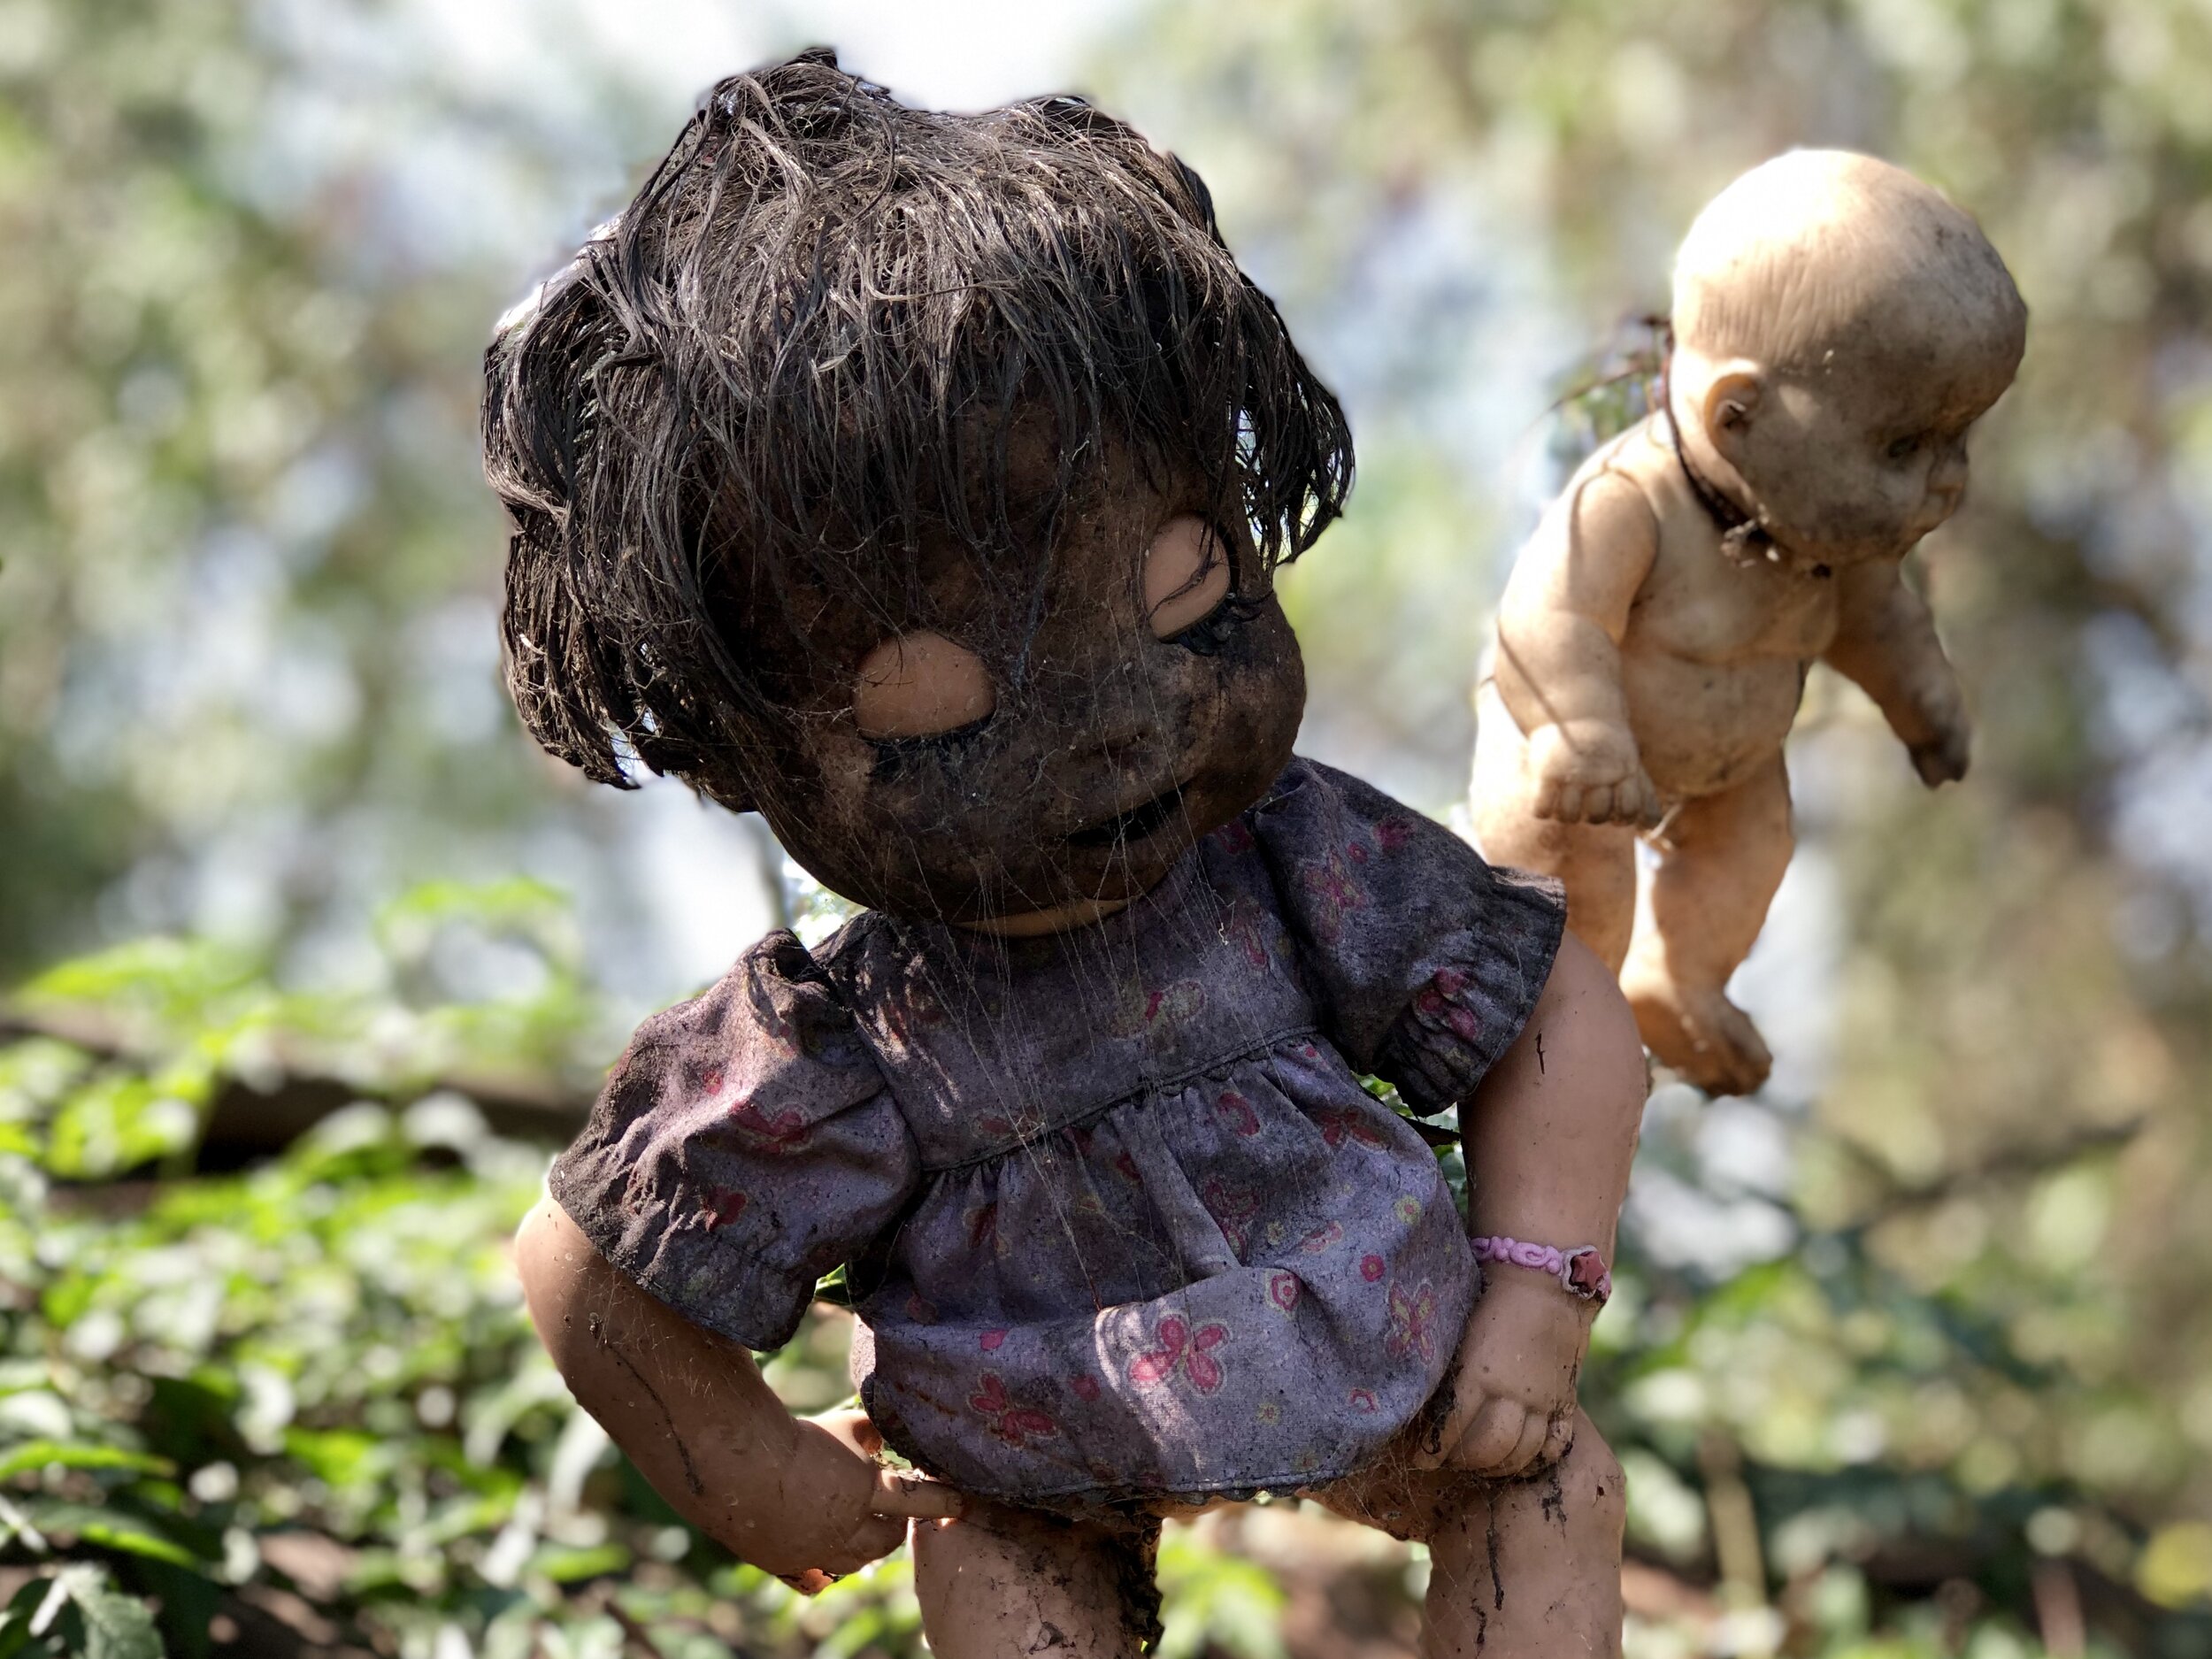 Horrifying (but cool) dolls like this are strung up all over the Island of the Dead Dolls.